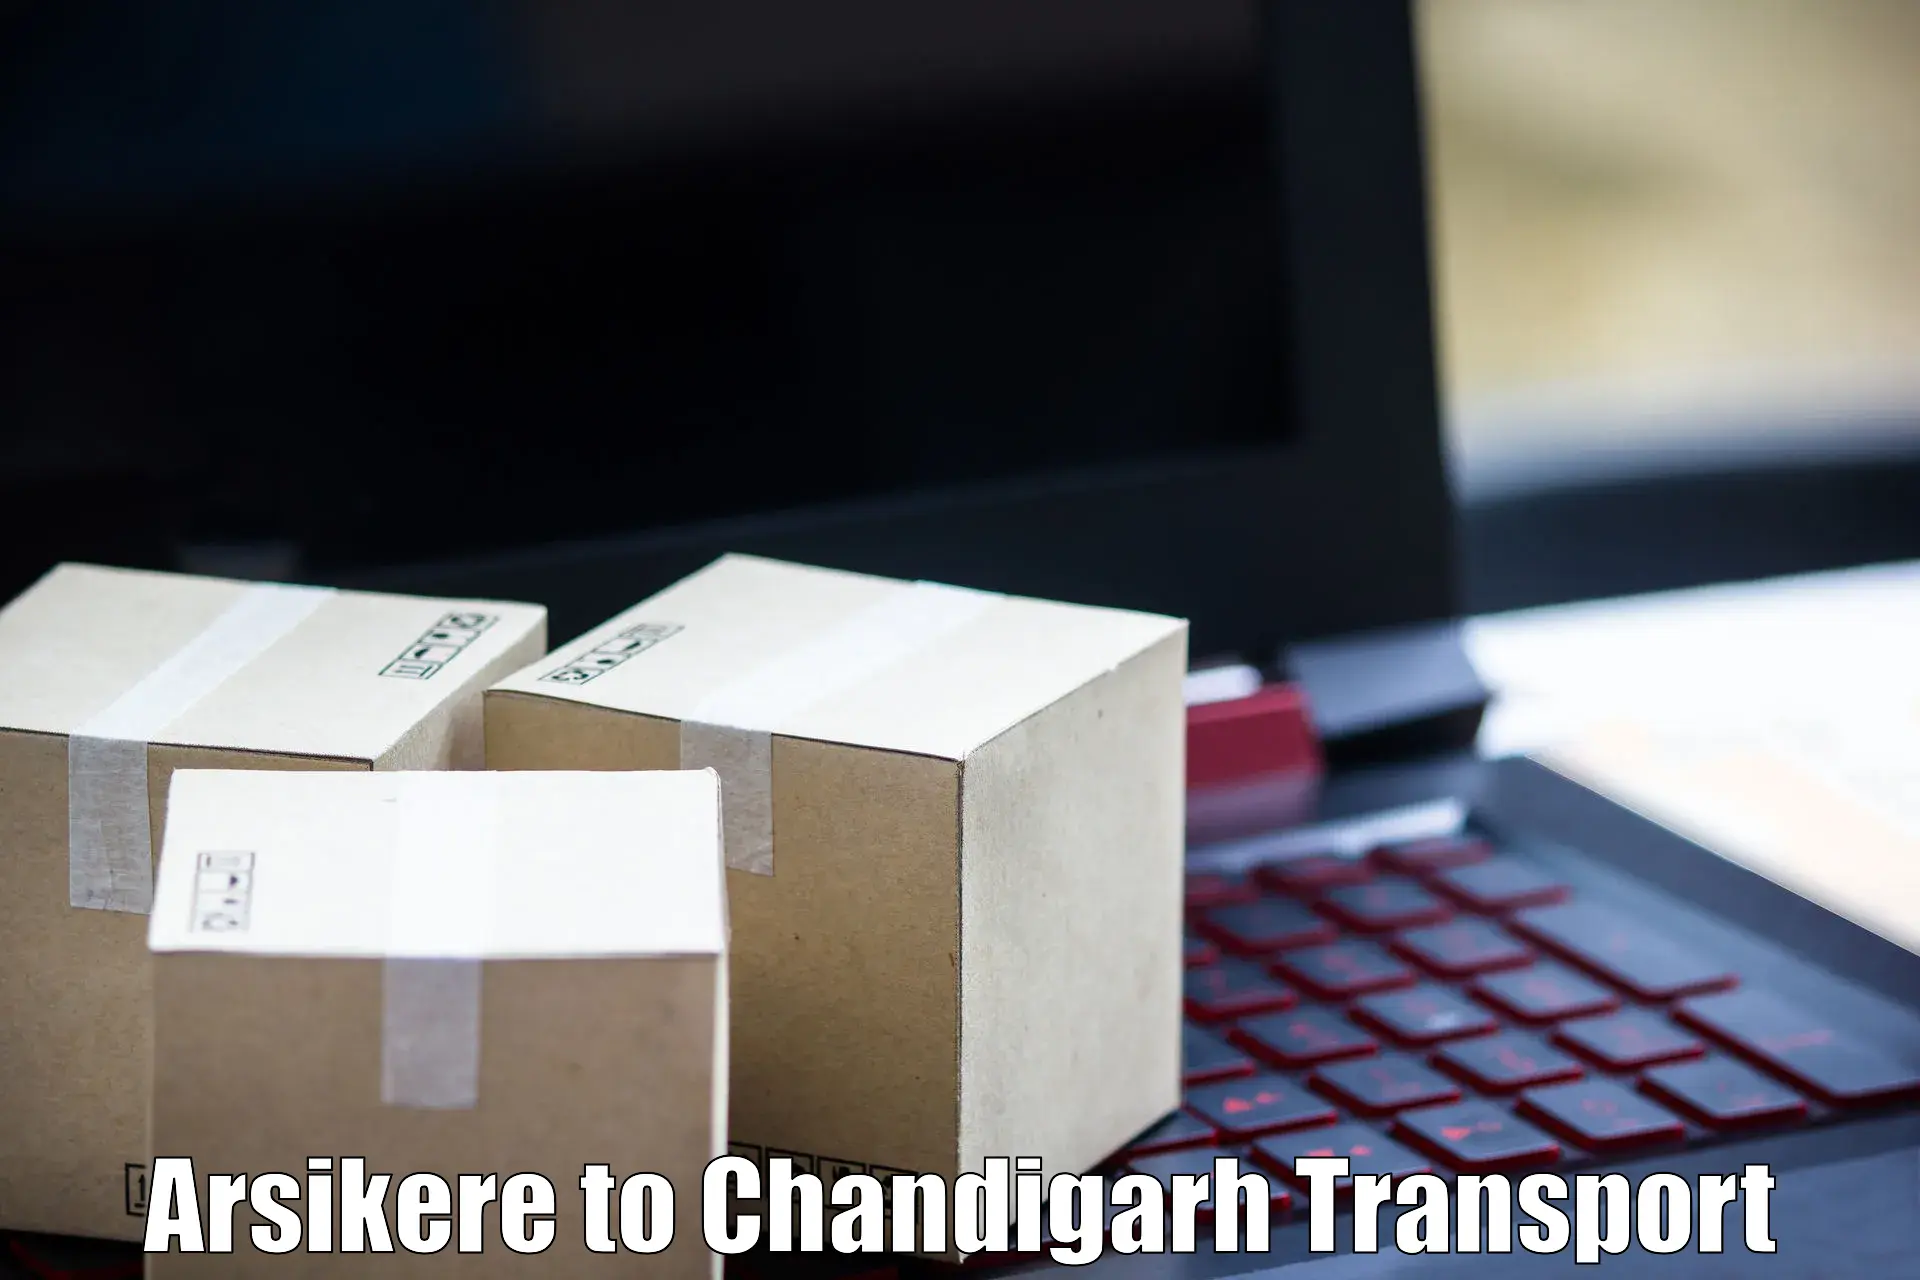 Road transport online services Arsikere to Chandigarh